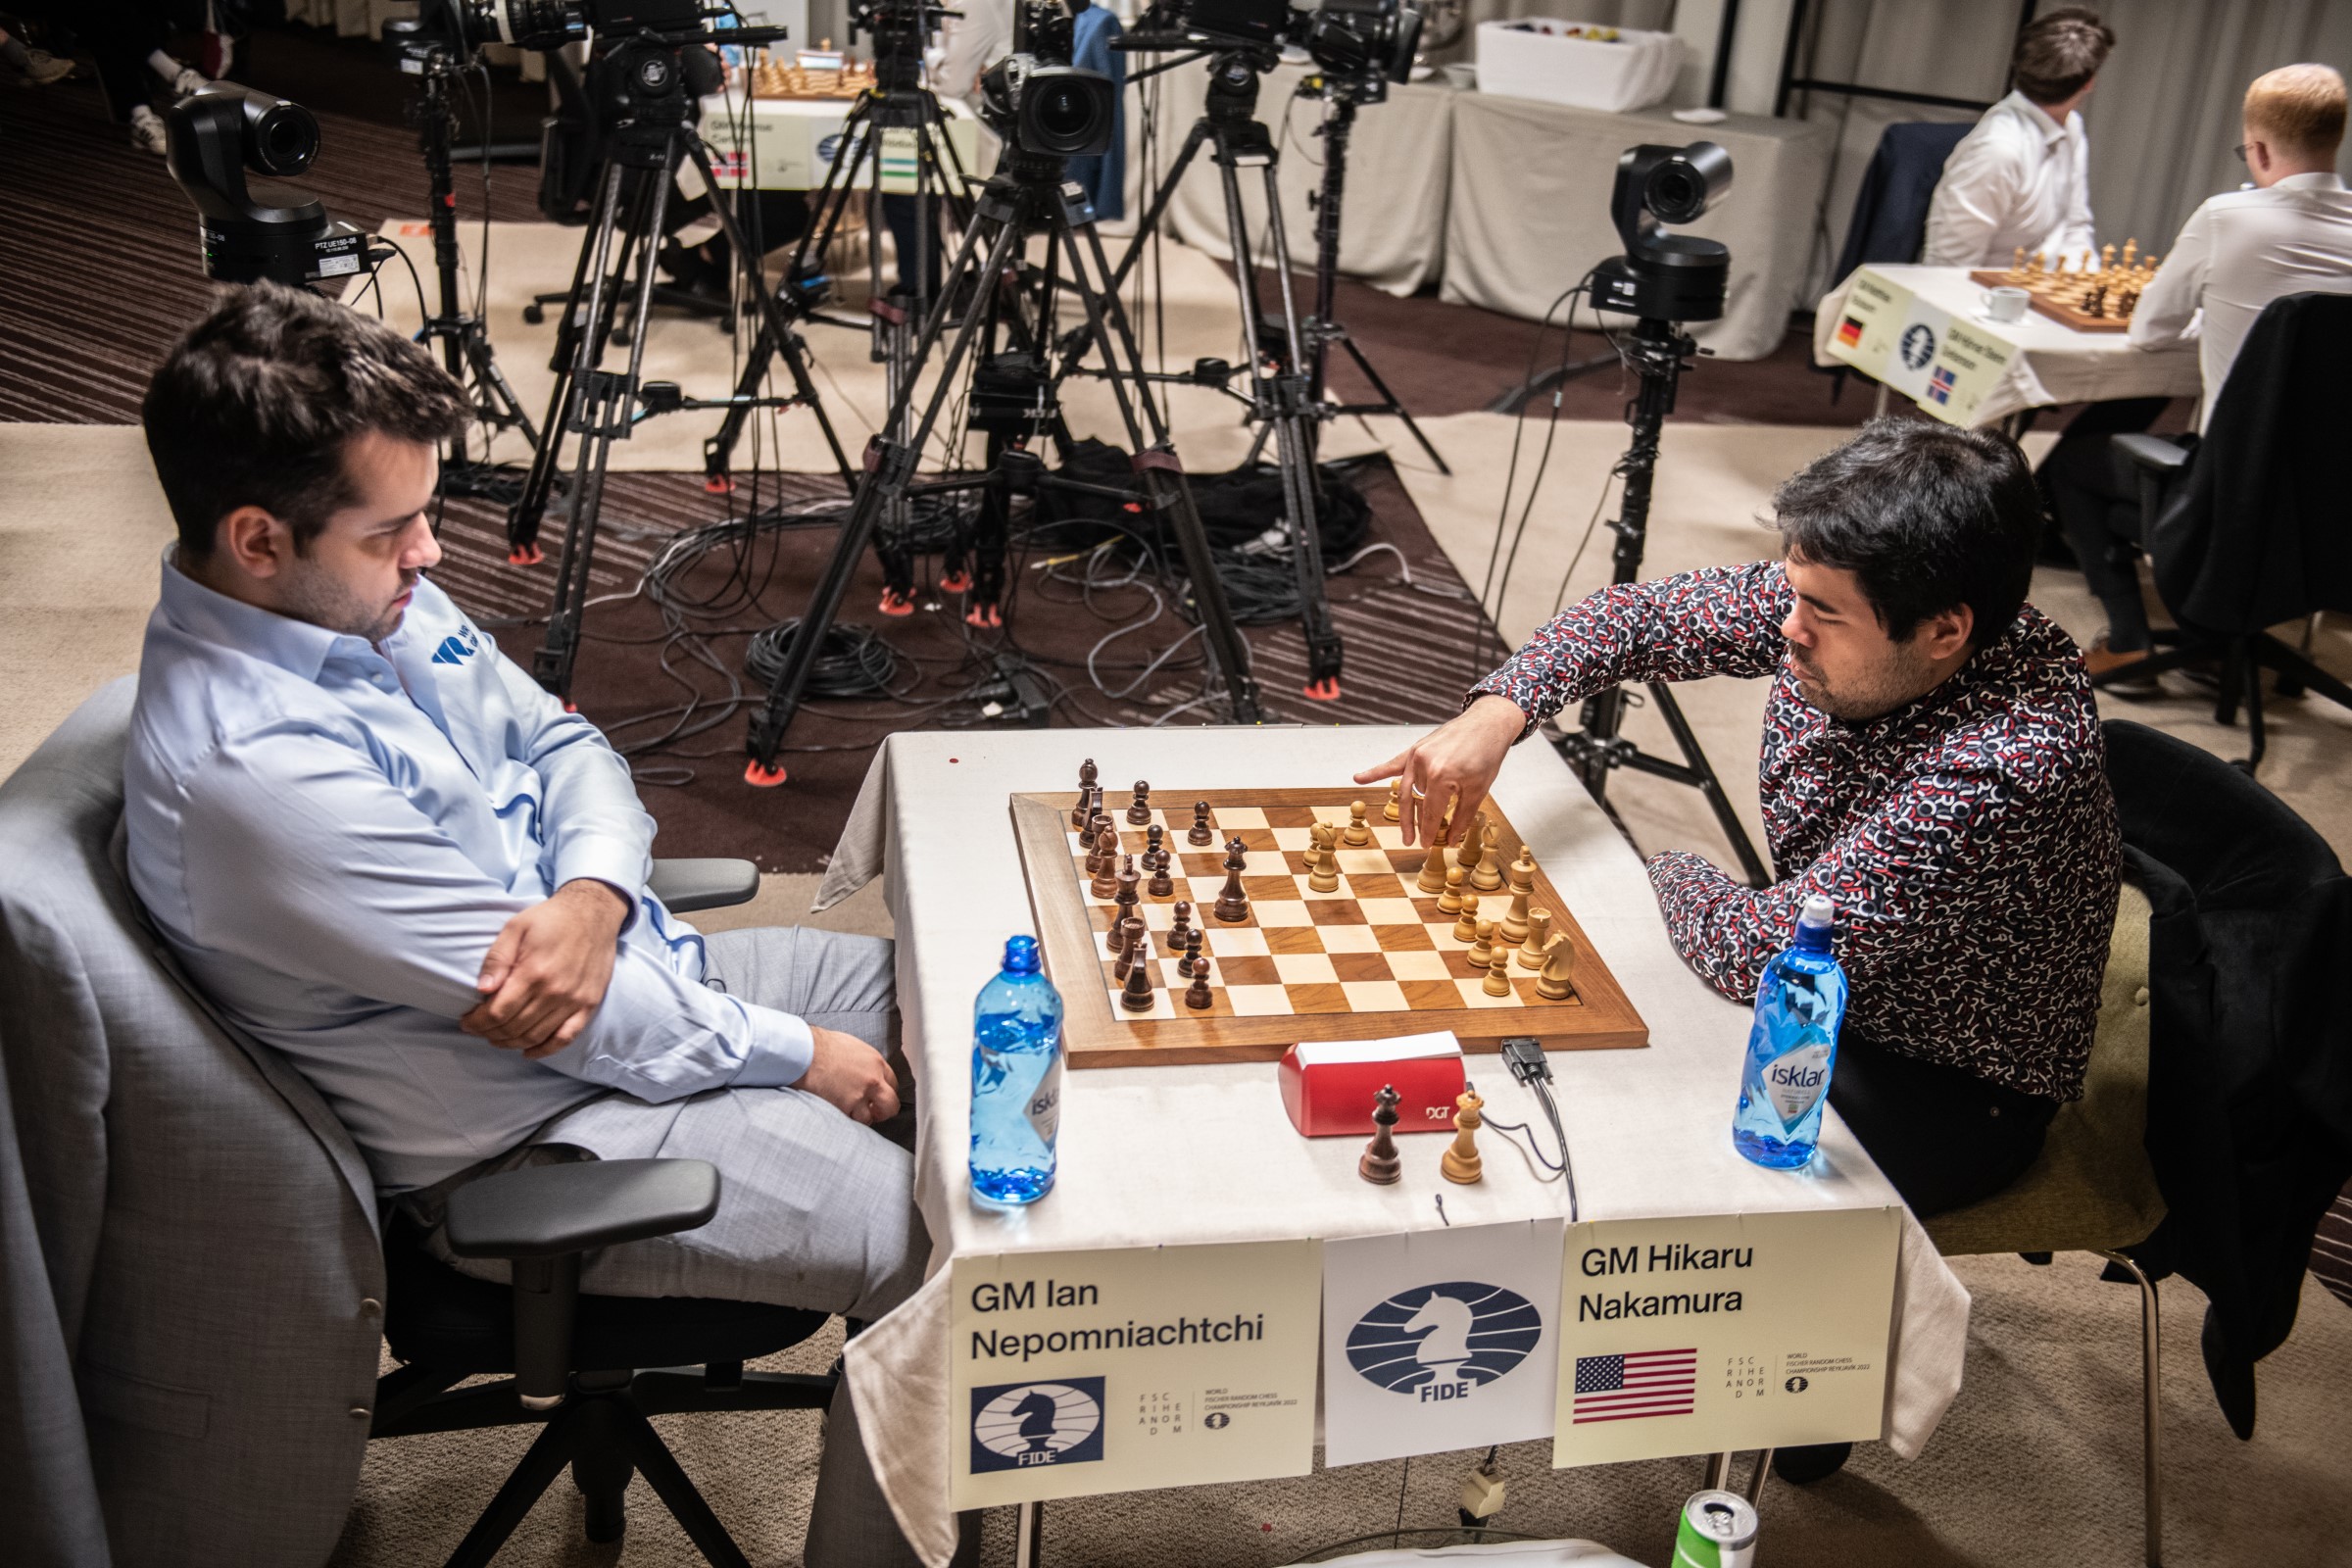 Chess.com on X: ♔ @GMHikaru wins four straight games in the   Global Championship Finals and is now only 2.6  points behind Carlsen in the live rapid rating list!   / X